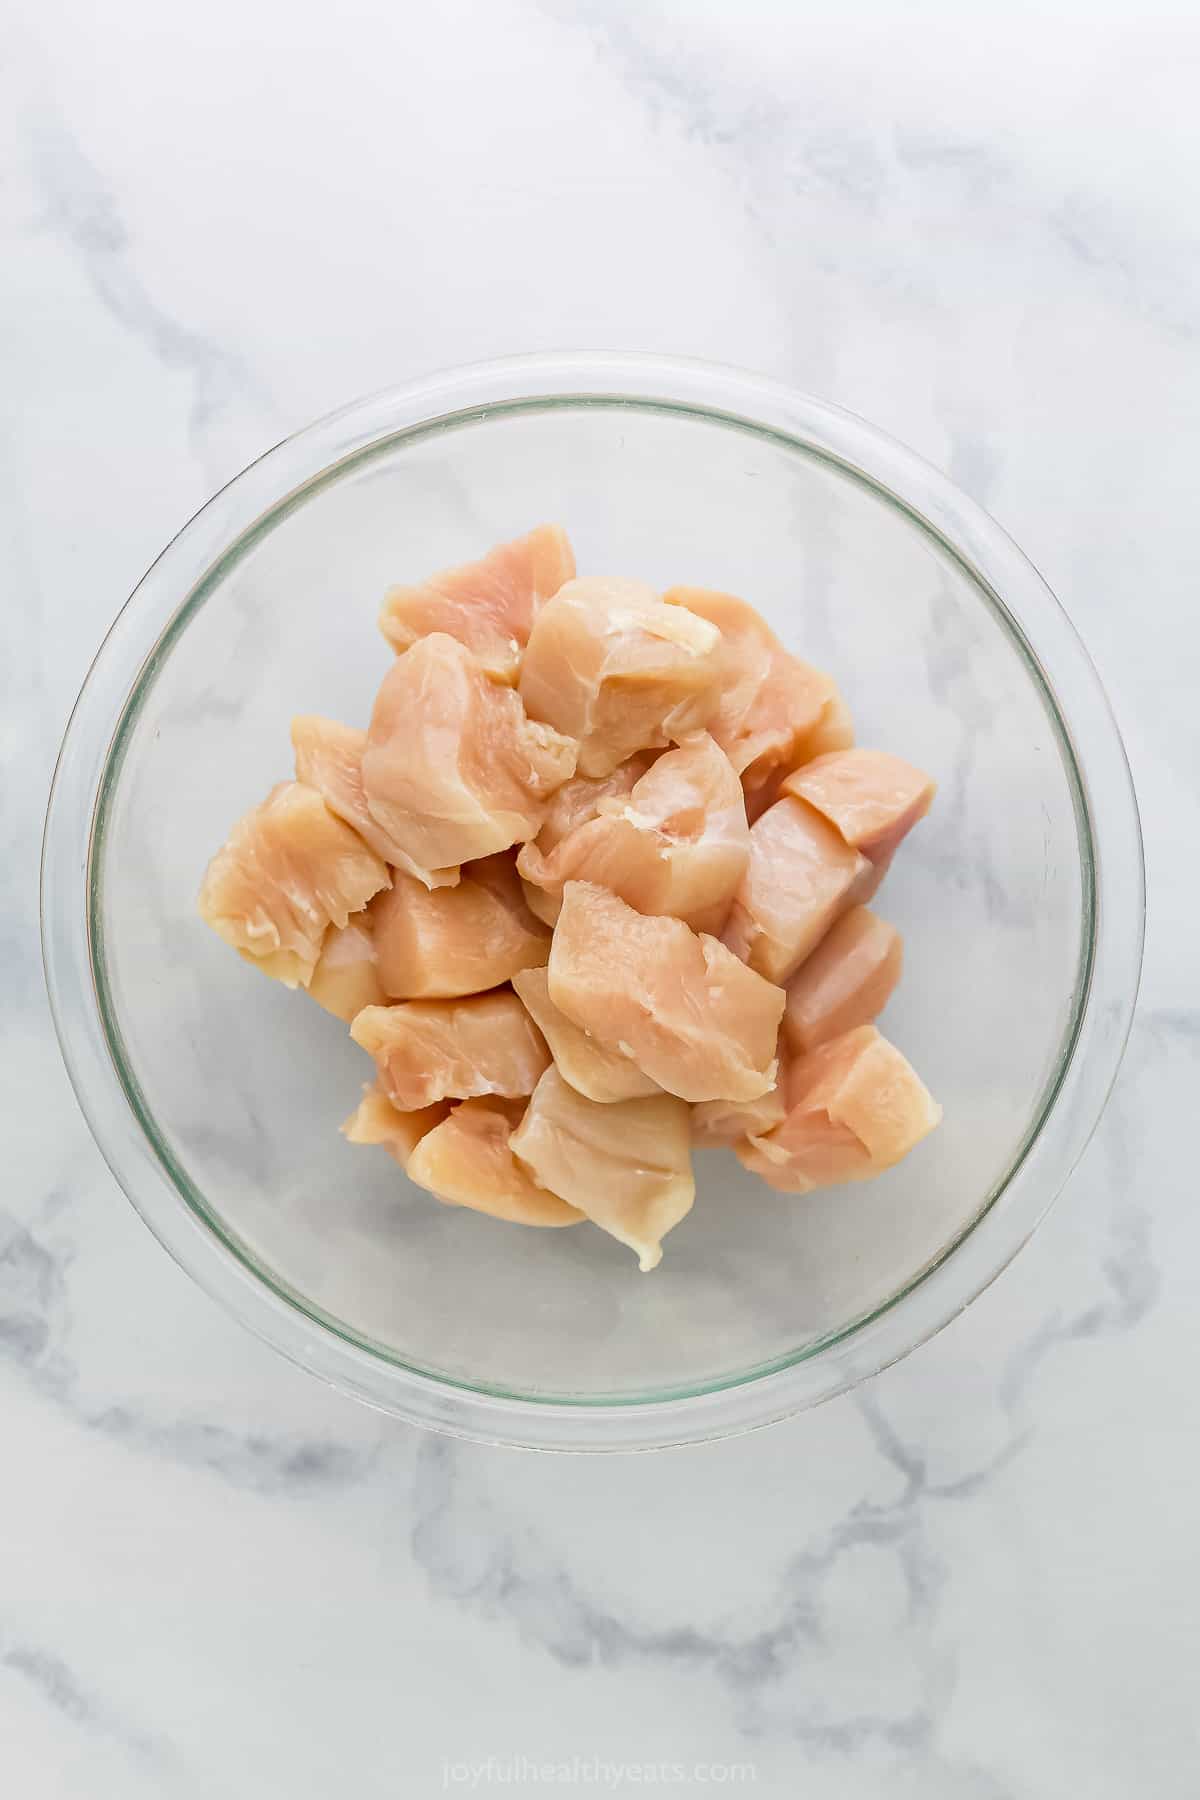 Raw cubes of boneless, skinless chicken in a glass bowl on a kitchen countertop